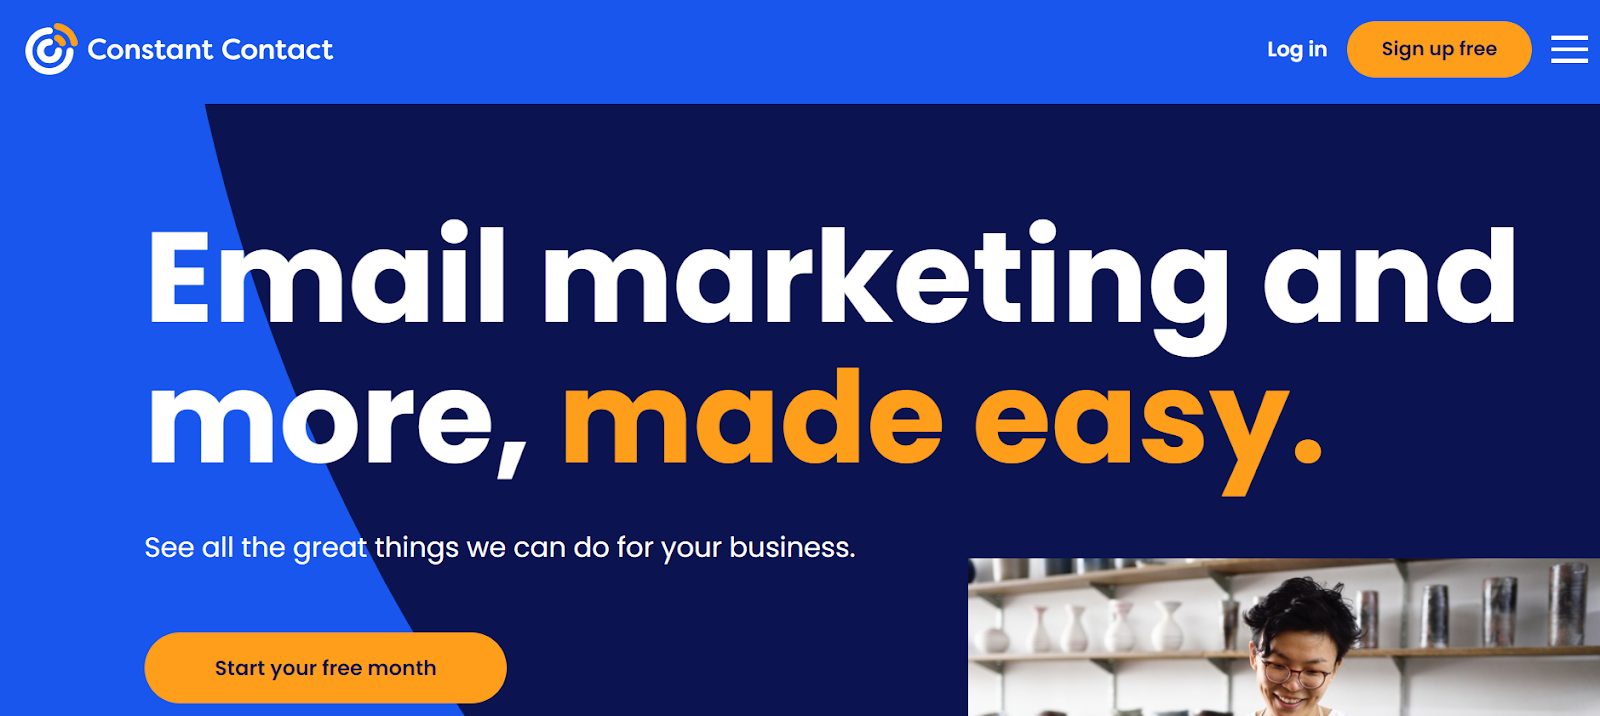 Email_Marketing_Made_Easy.png